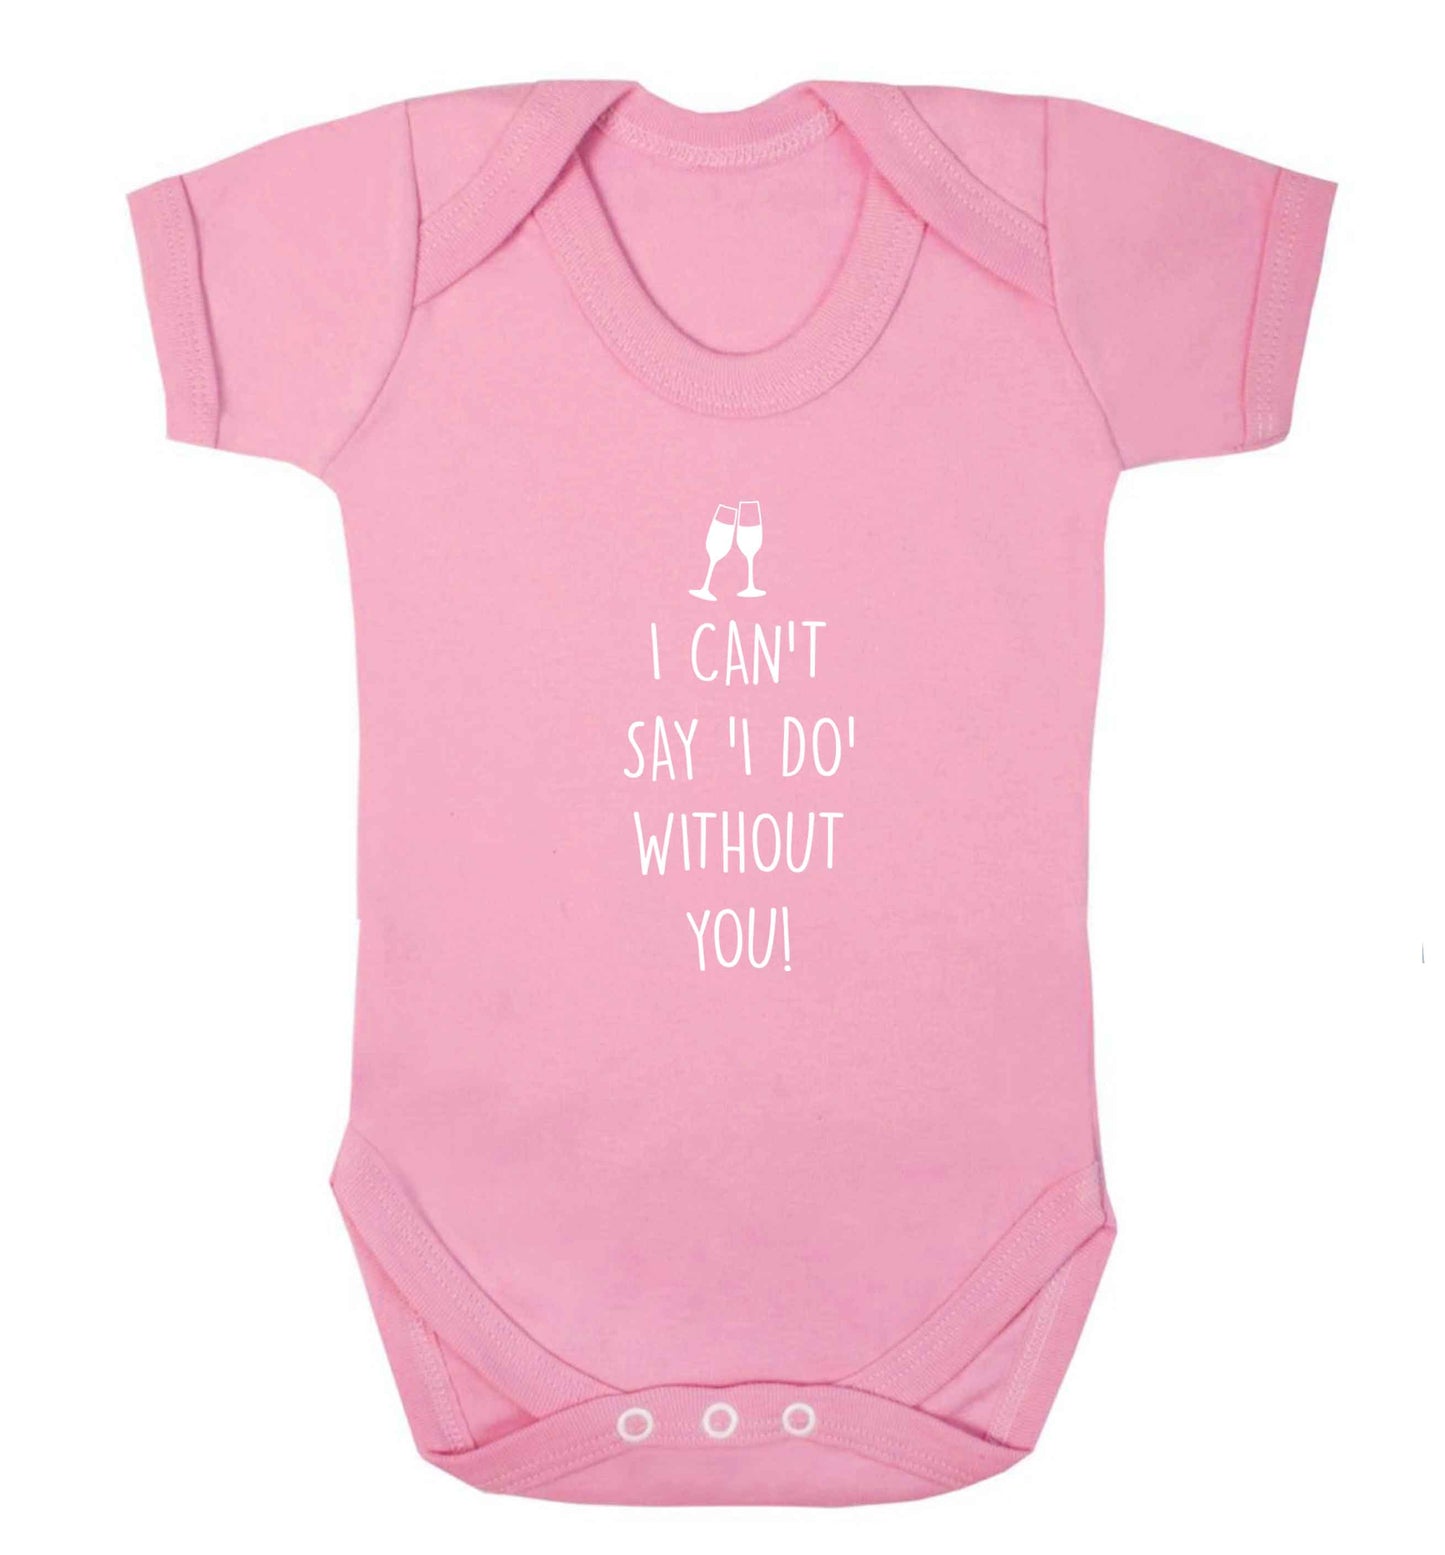 I can't say 'I do' without you! baby vest pale pink 18-24 months